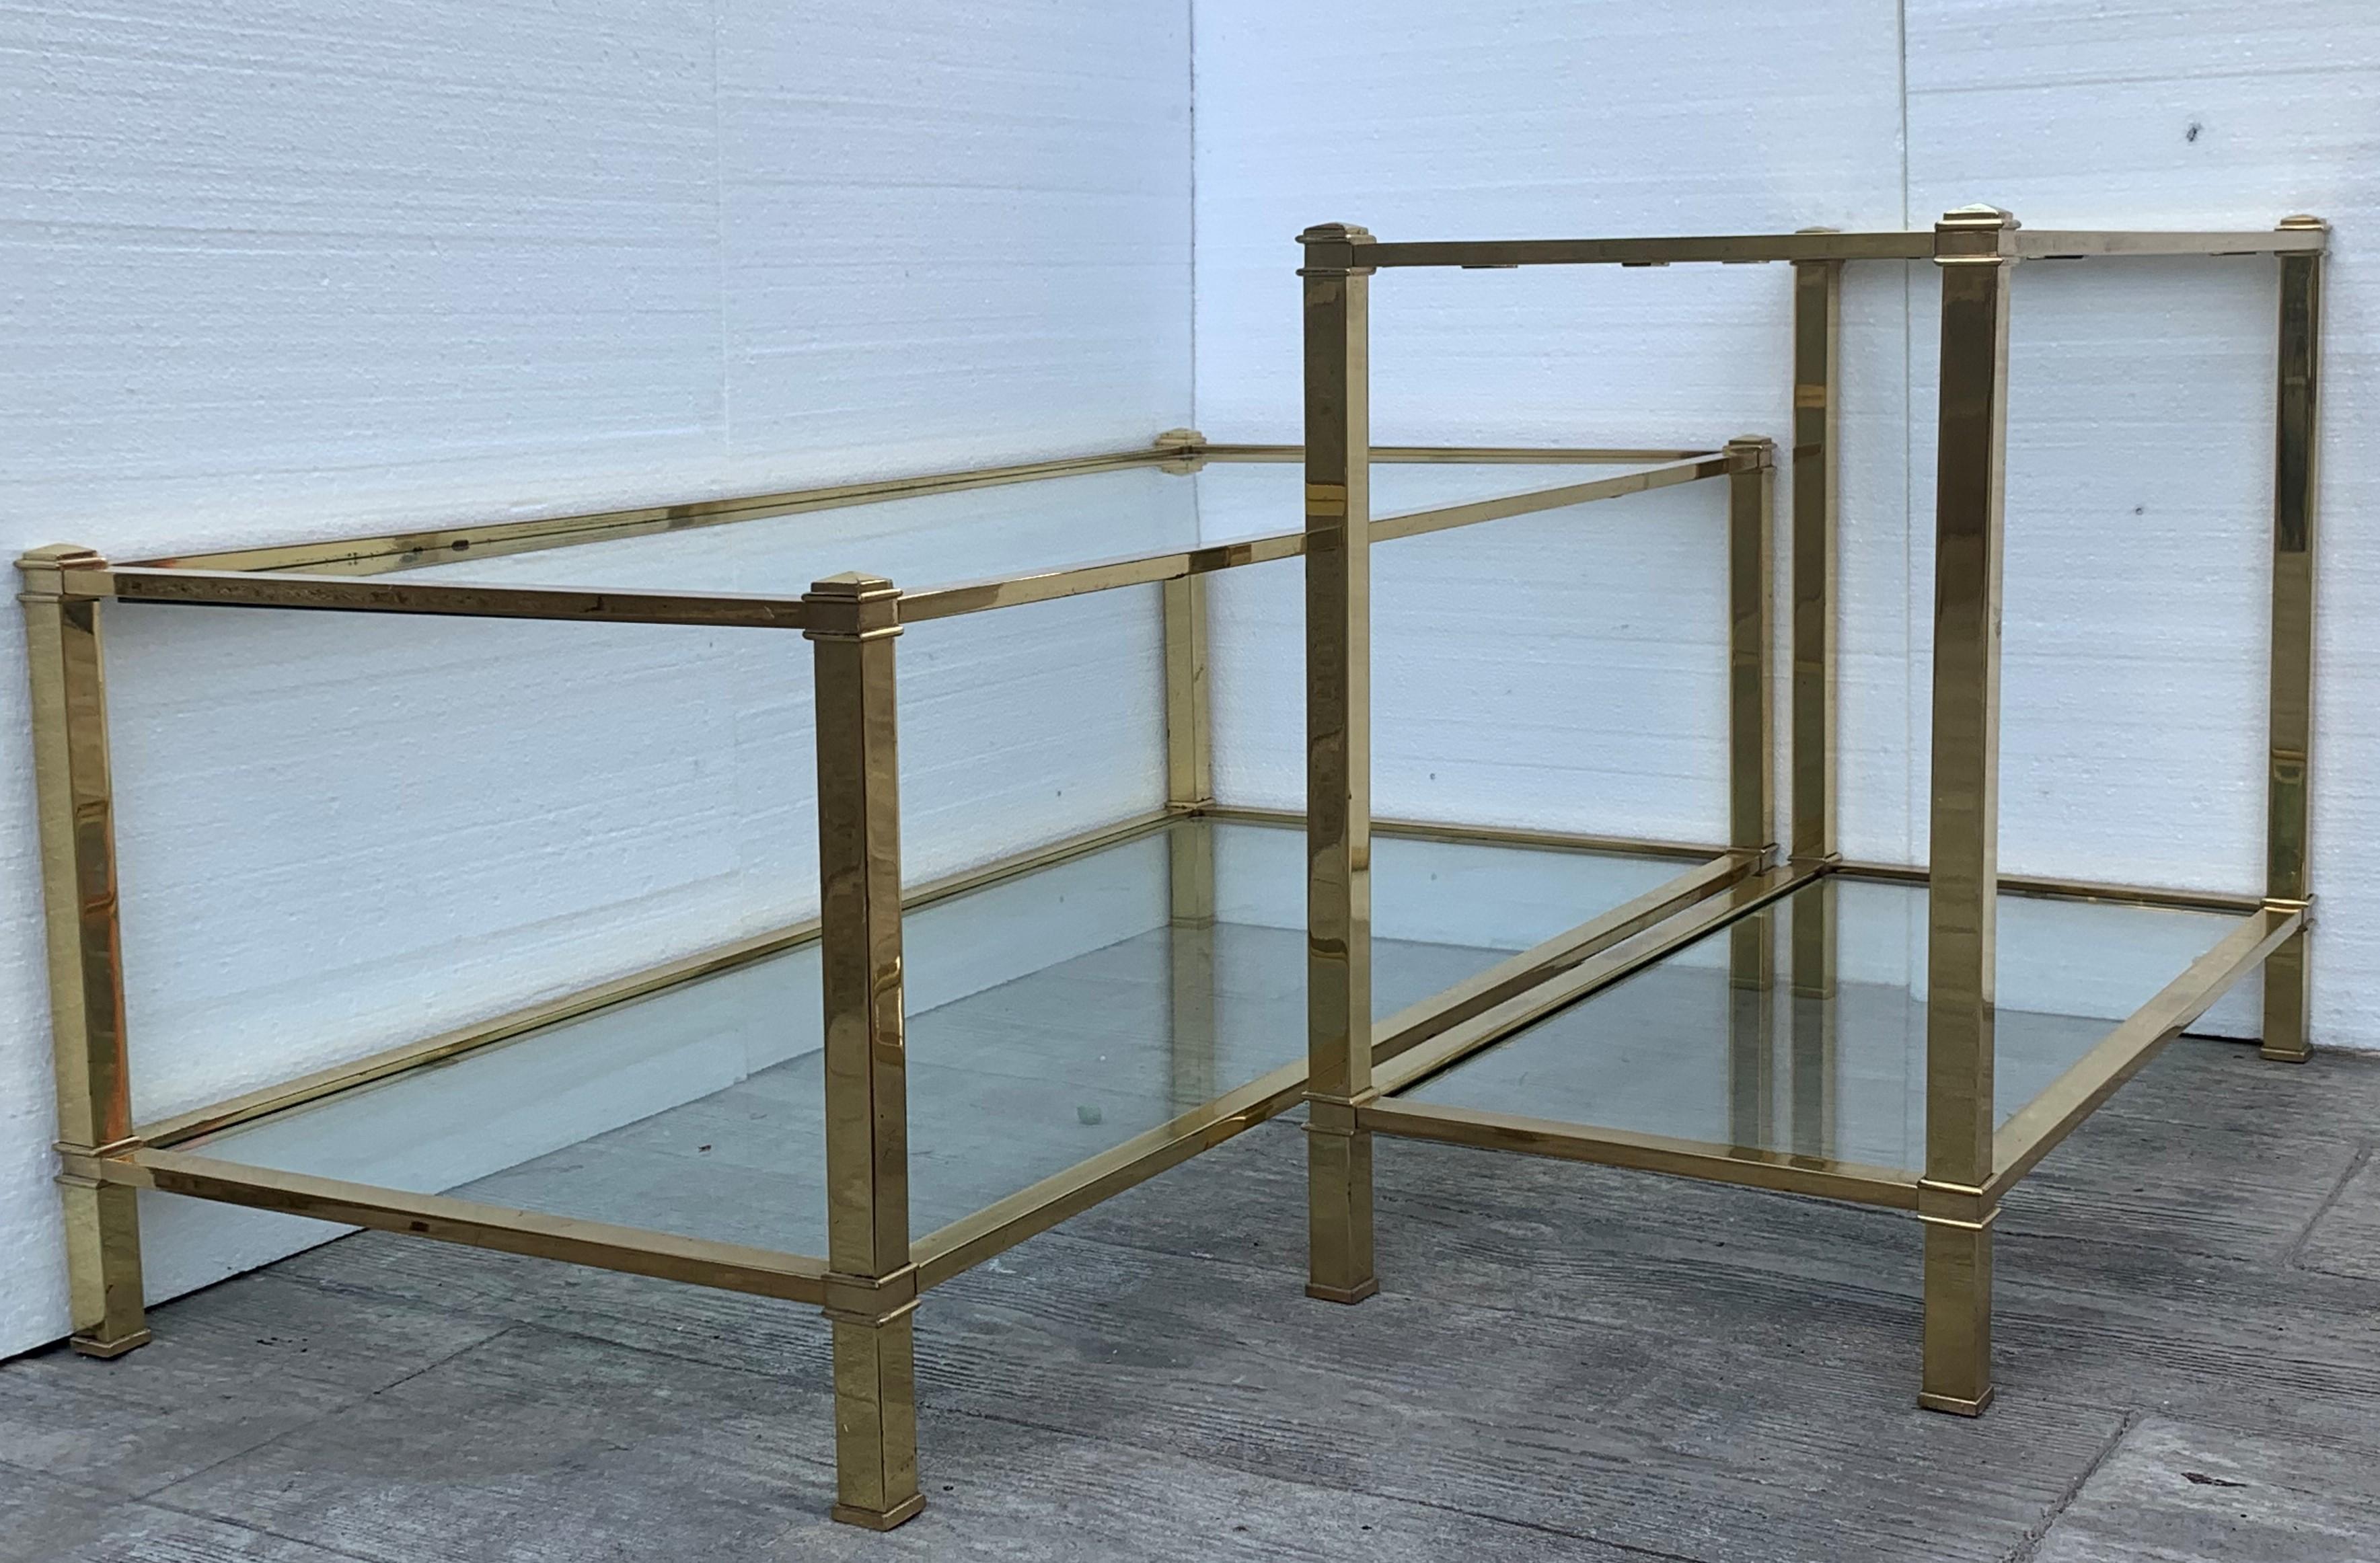 Mid-Century Modern set of brass table and console table with glass

Measurements:
Console:
H 22.24in, W 29.92in, D 14.17in

Table:
H 15.75in, W 23.62in, D 20in.